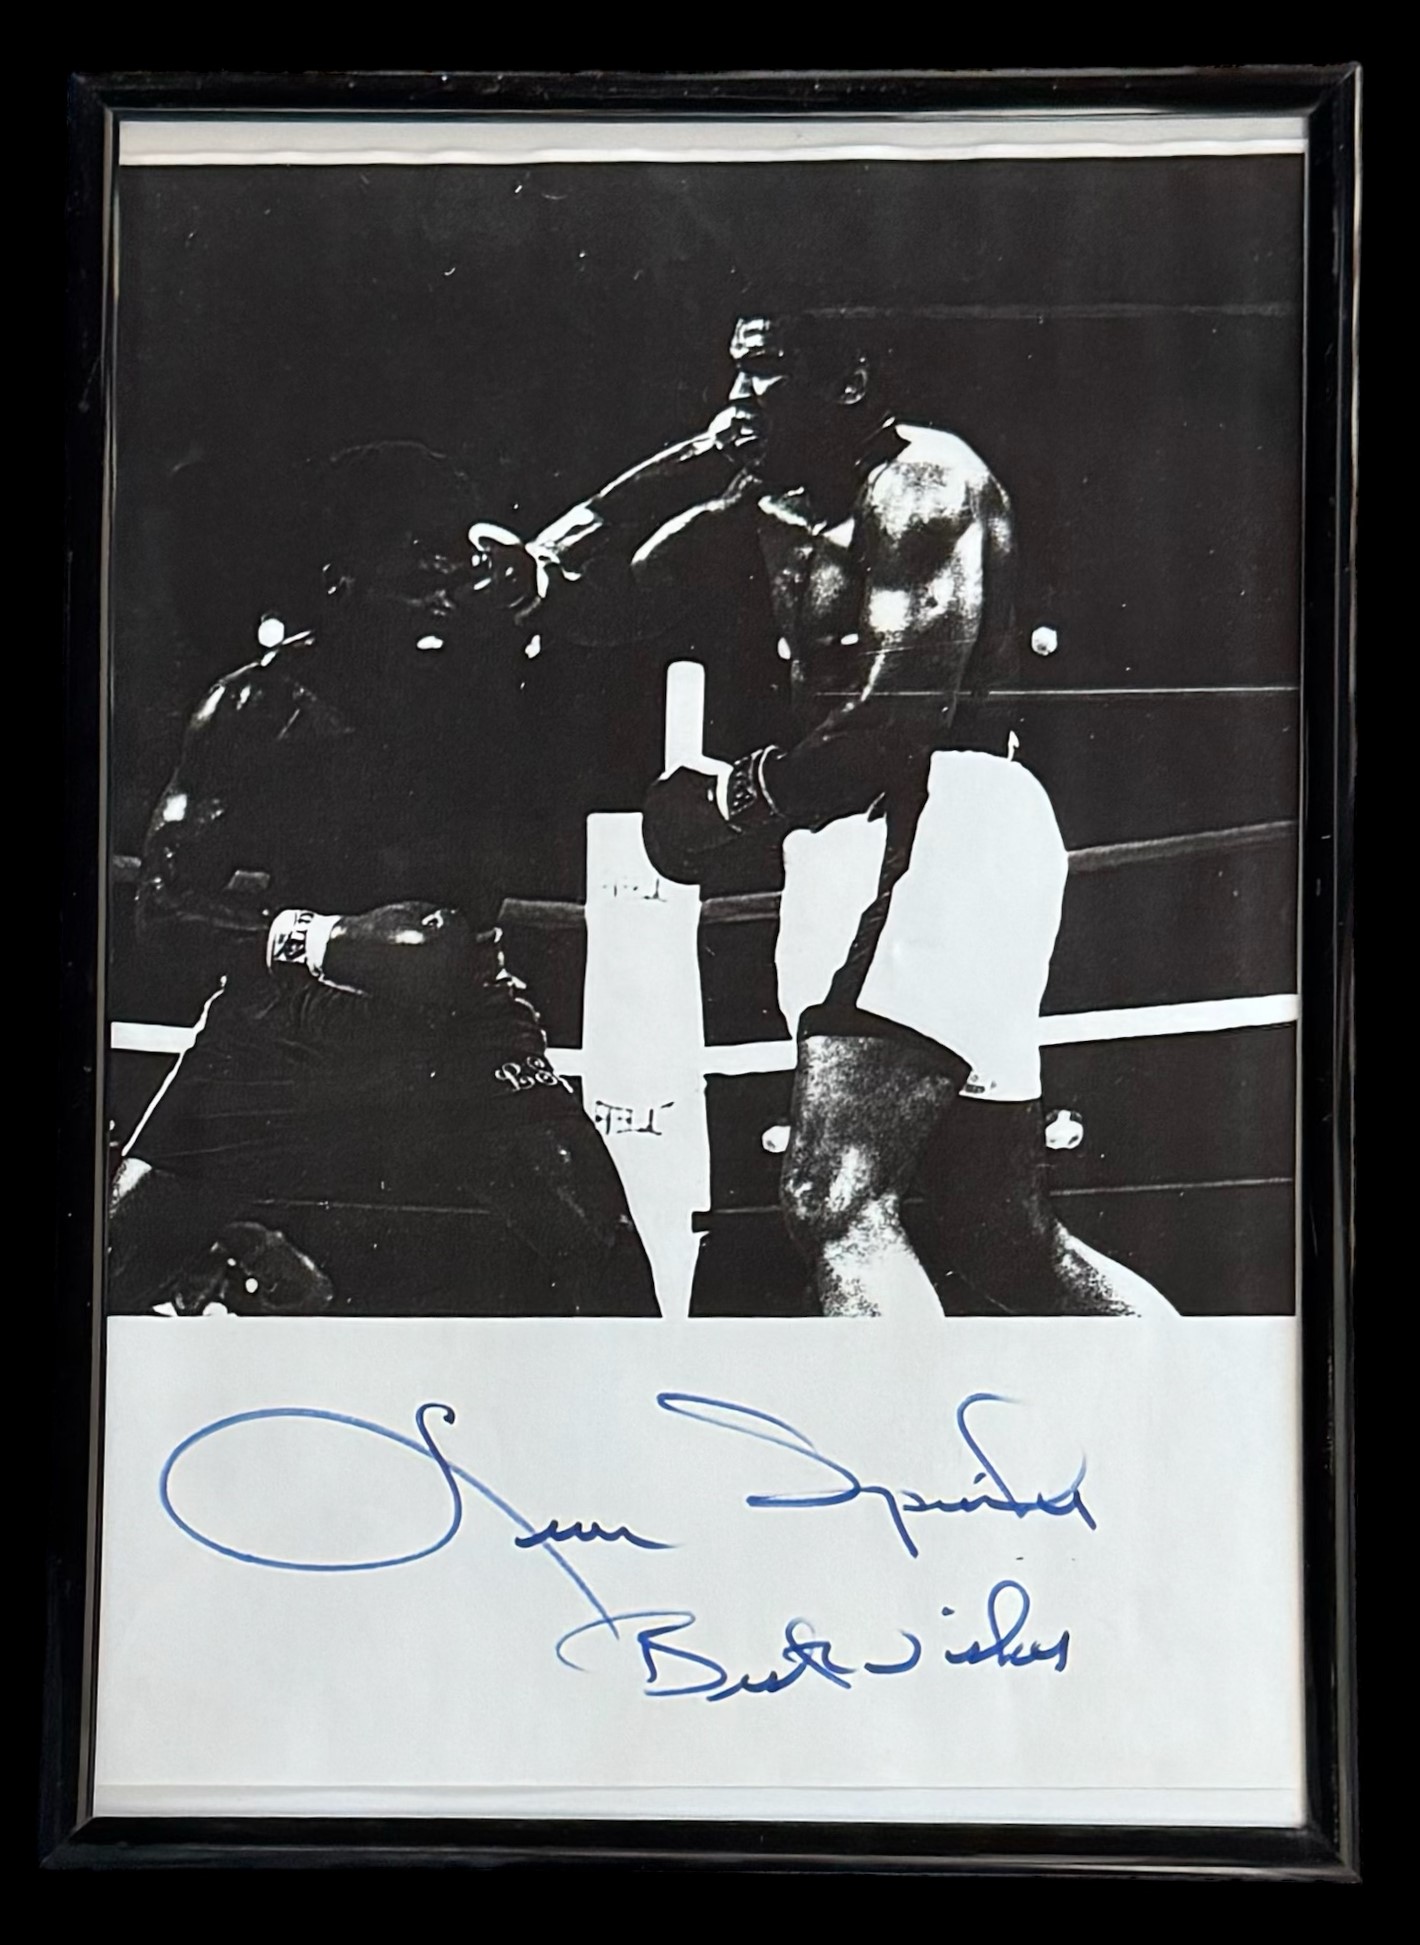 Leon Spinks signature below grainy black and white photo. Framed to approx size 12x10inch. Good